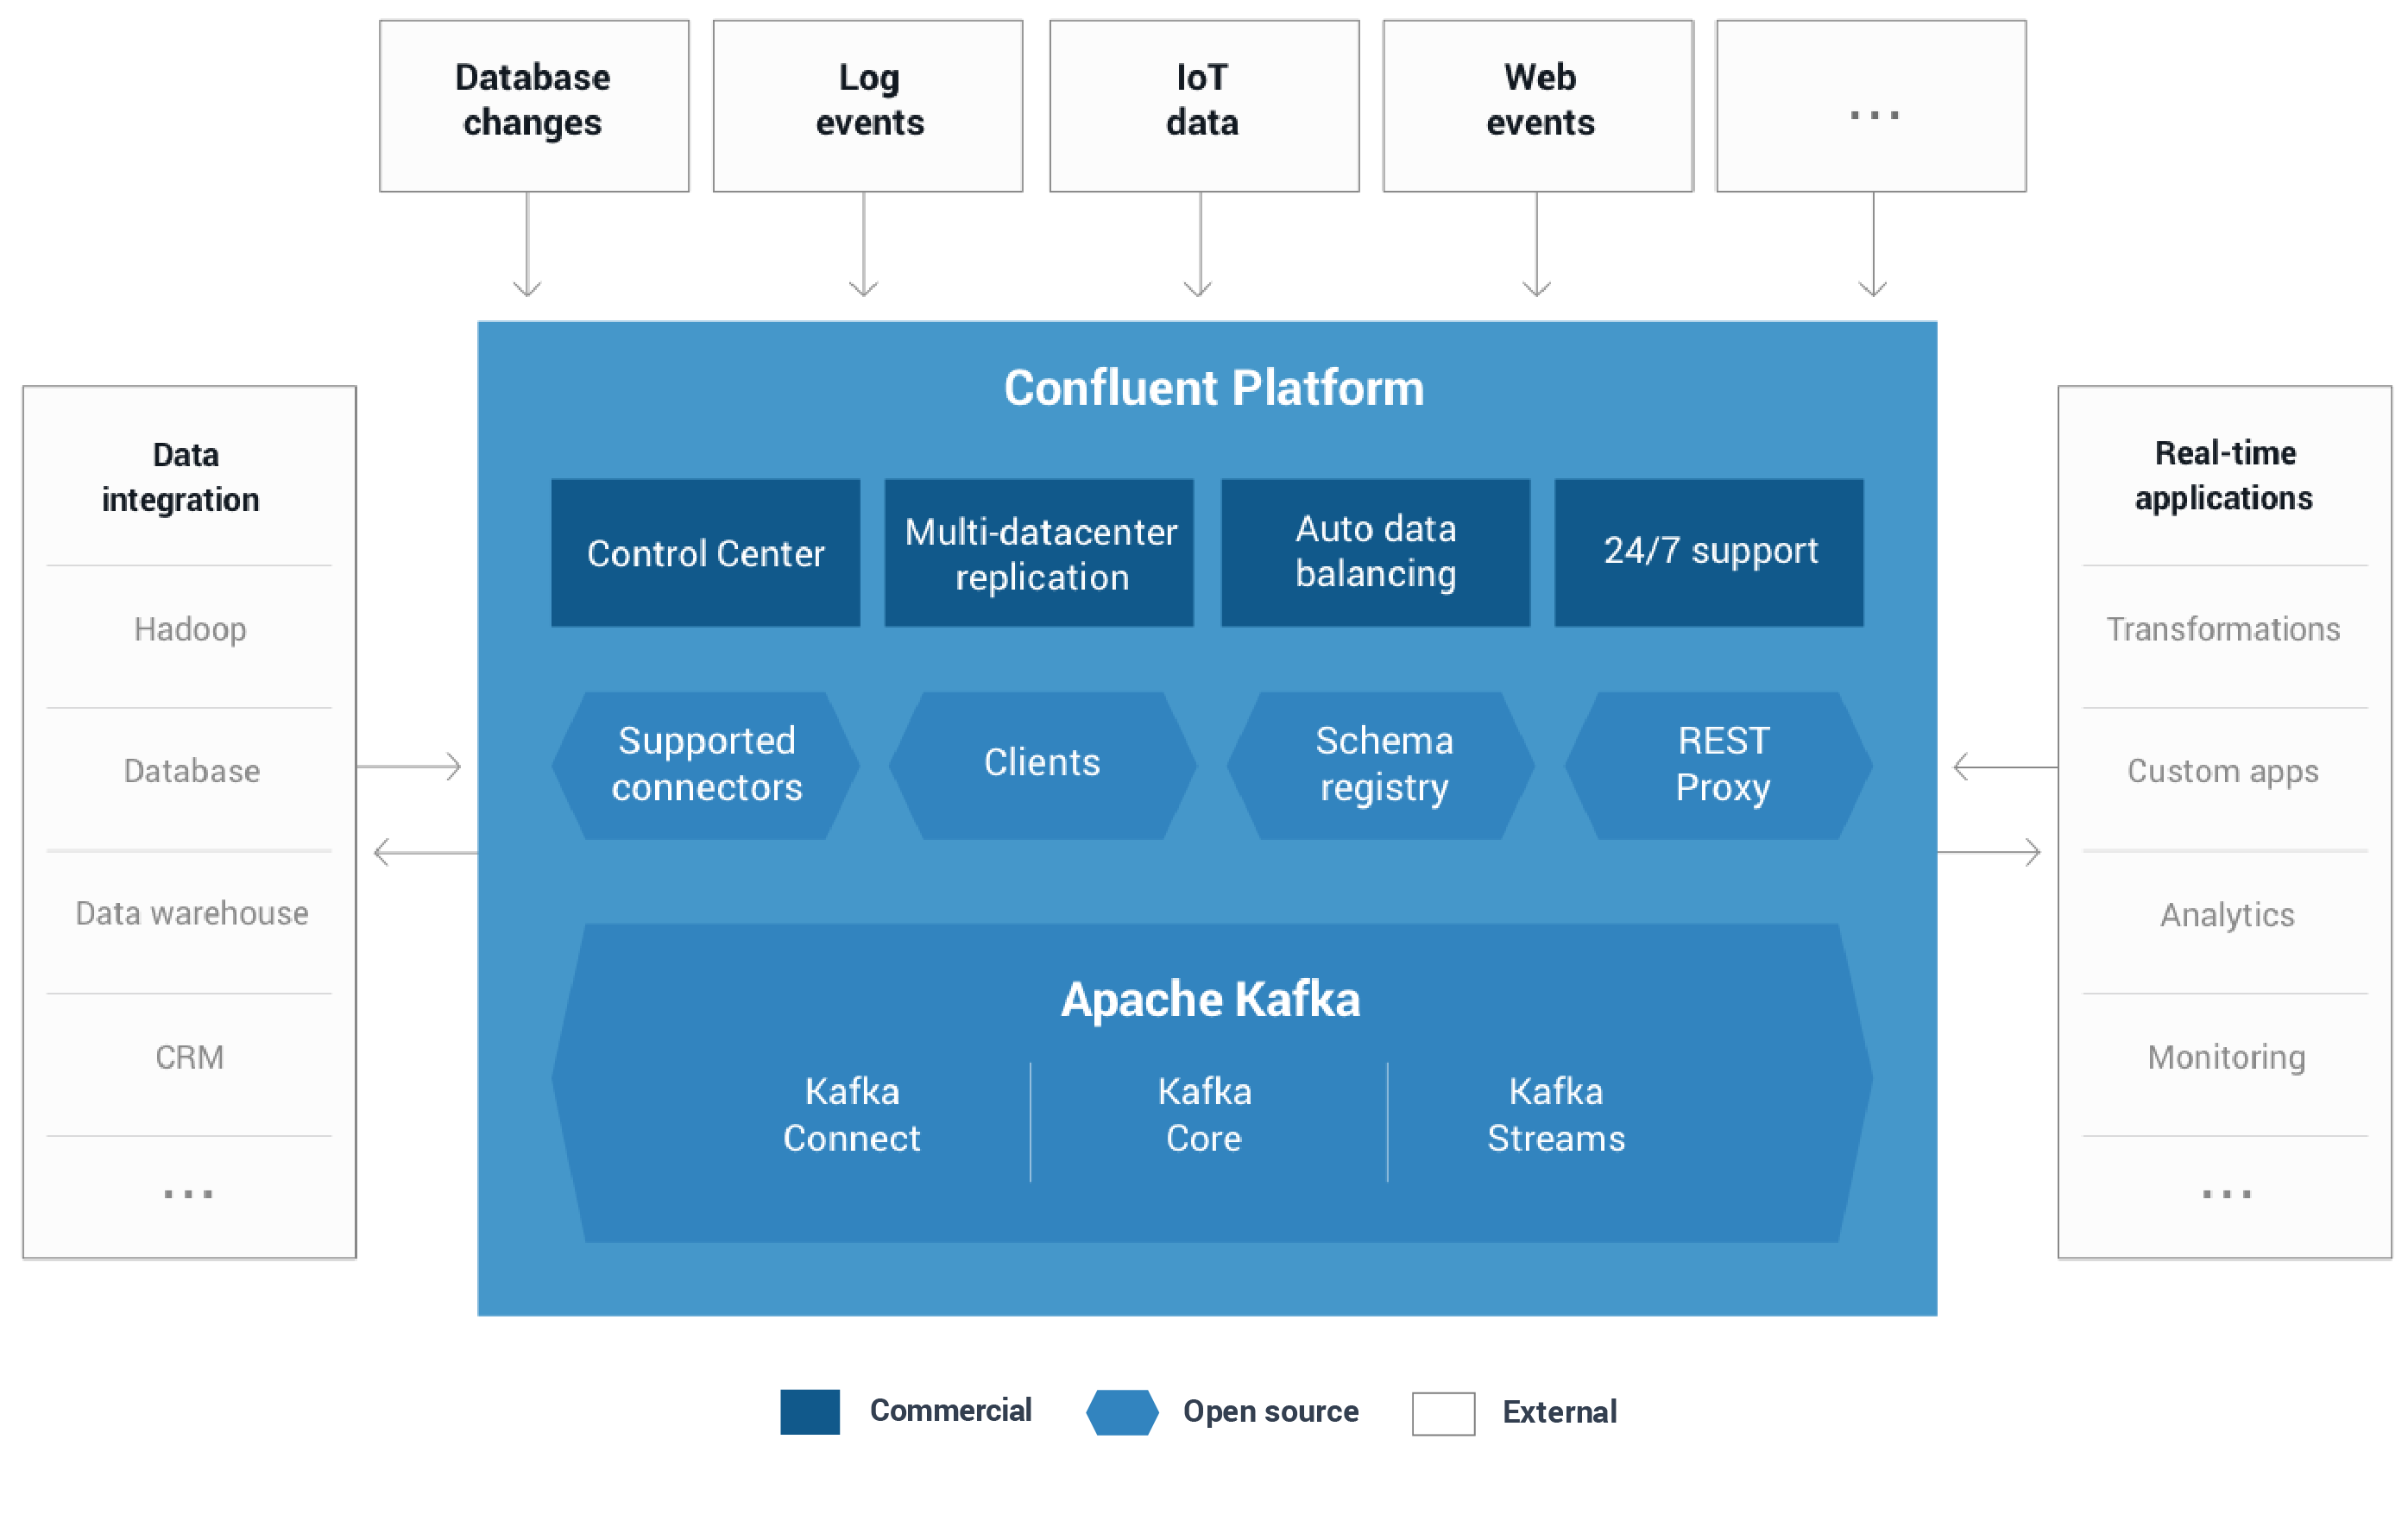 Announcing Confluent 3.1 with Apache Kafka 0.10.1.0